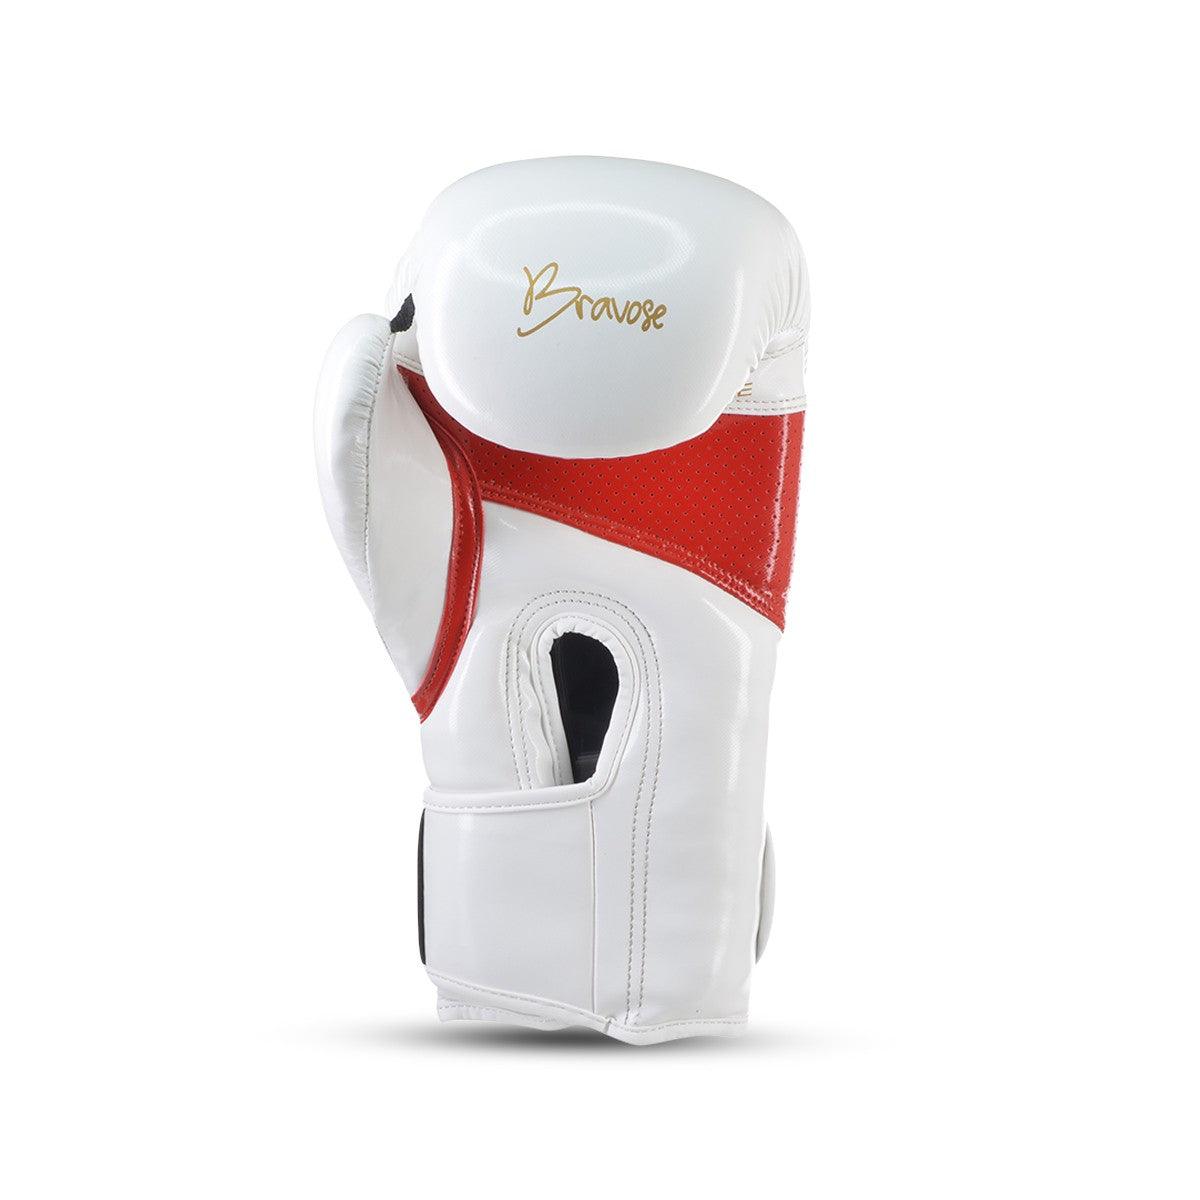 Alpha Premium Quality Boxing Gloves for Bag and Sparring - Bravose